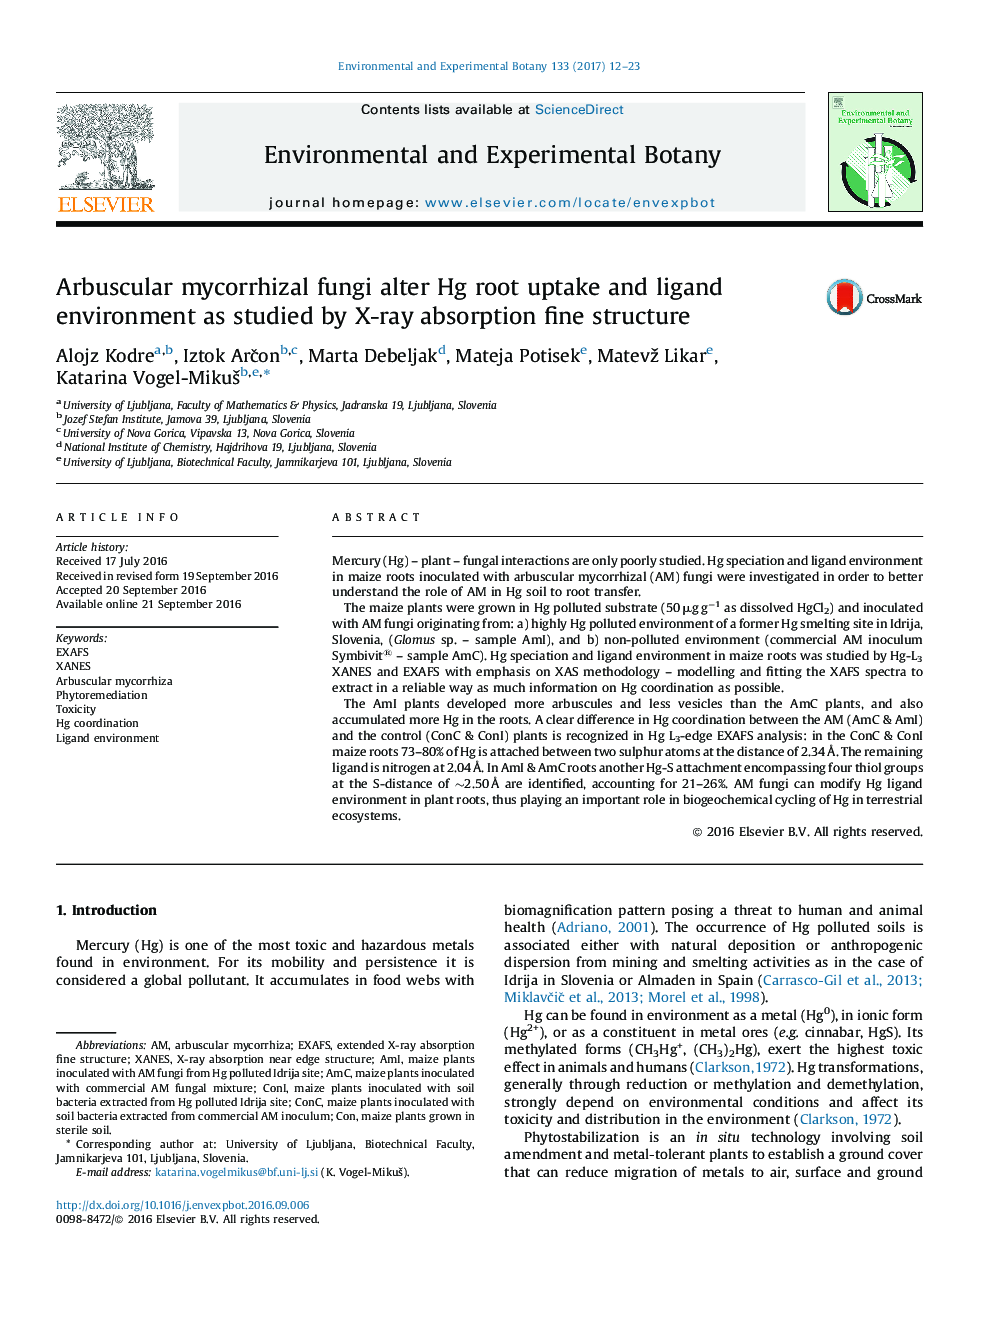 Arbuscular mycorrhizal fungi alter Hg root uptake and ligand environment as studied by X-ray absorption fine structure